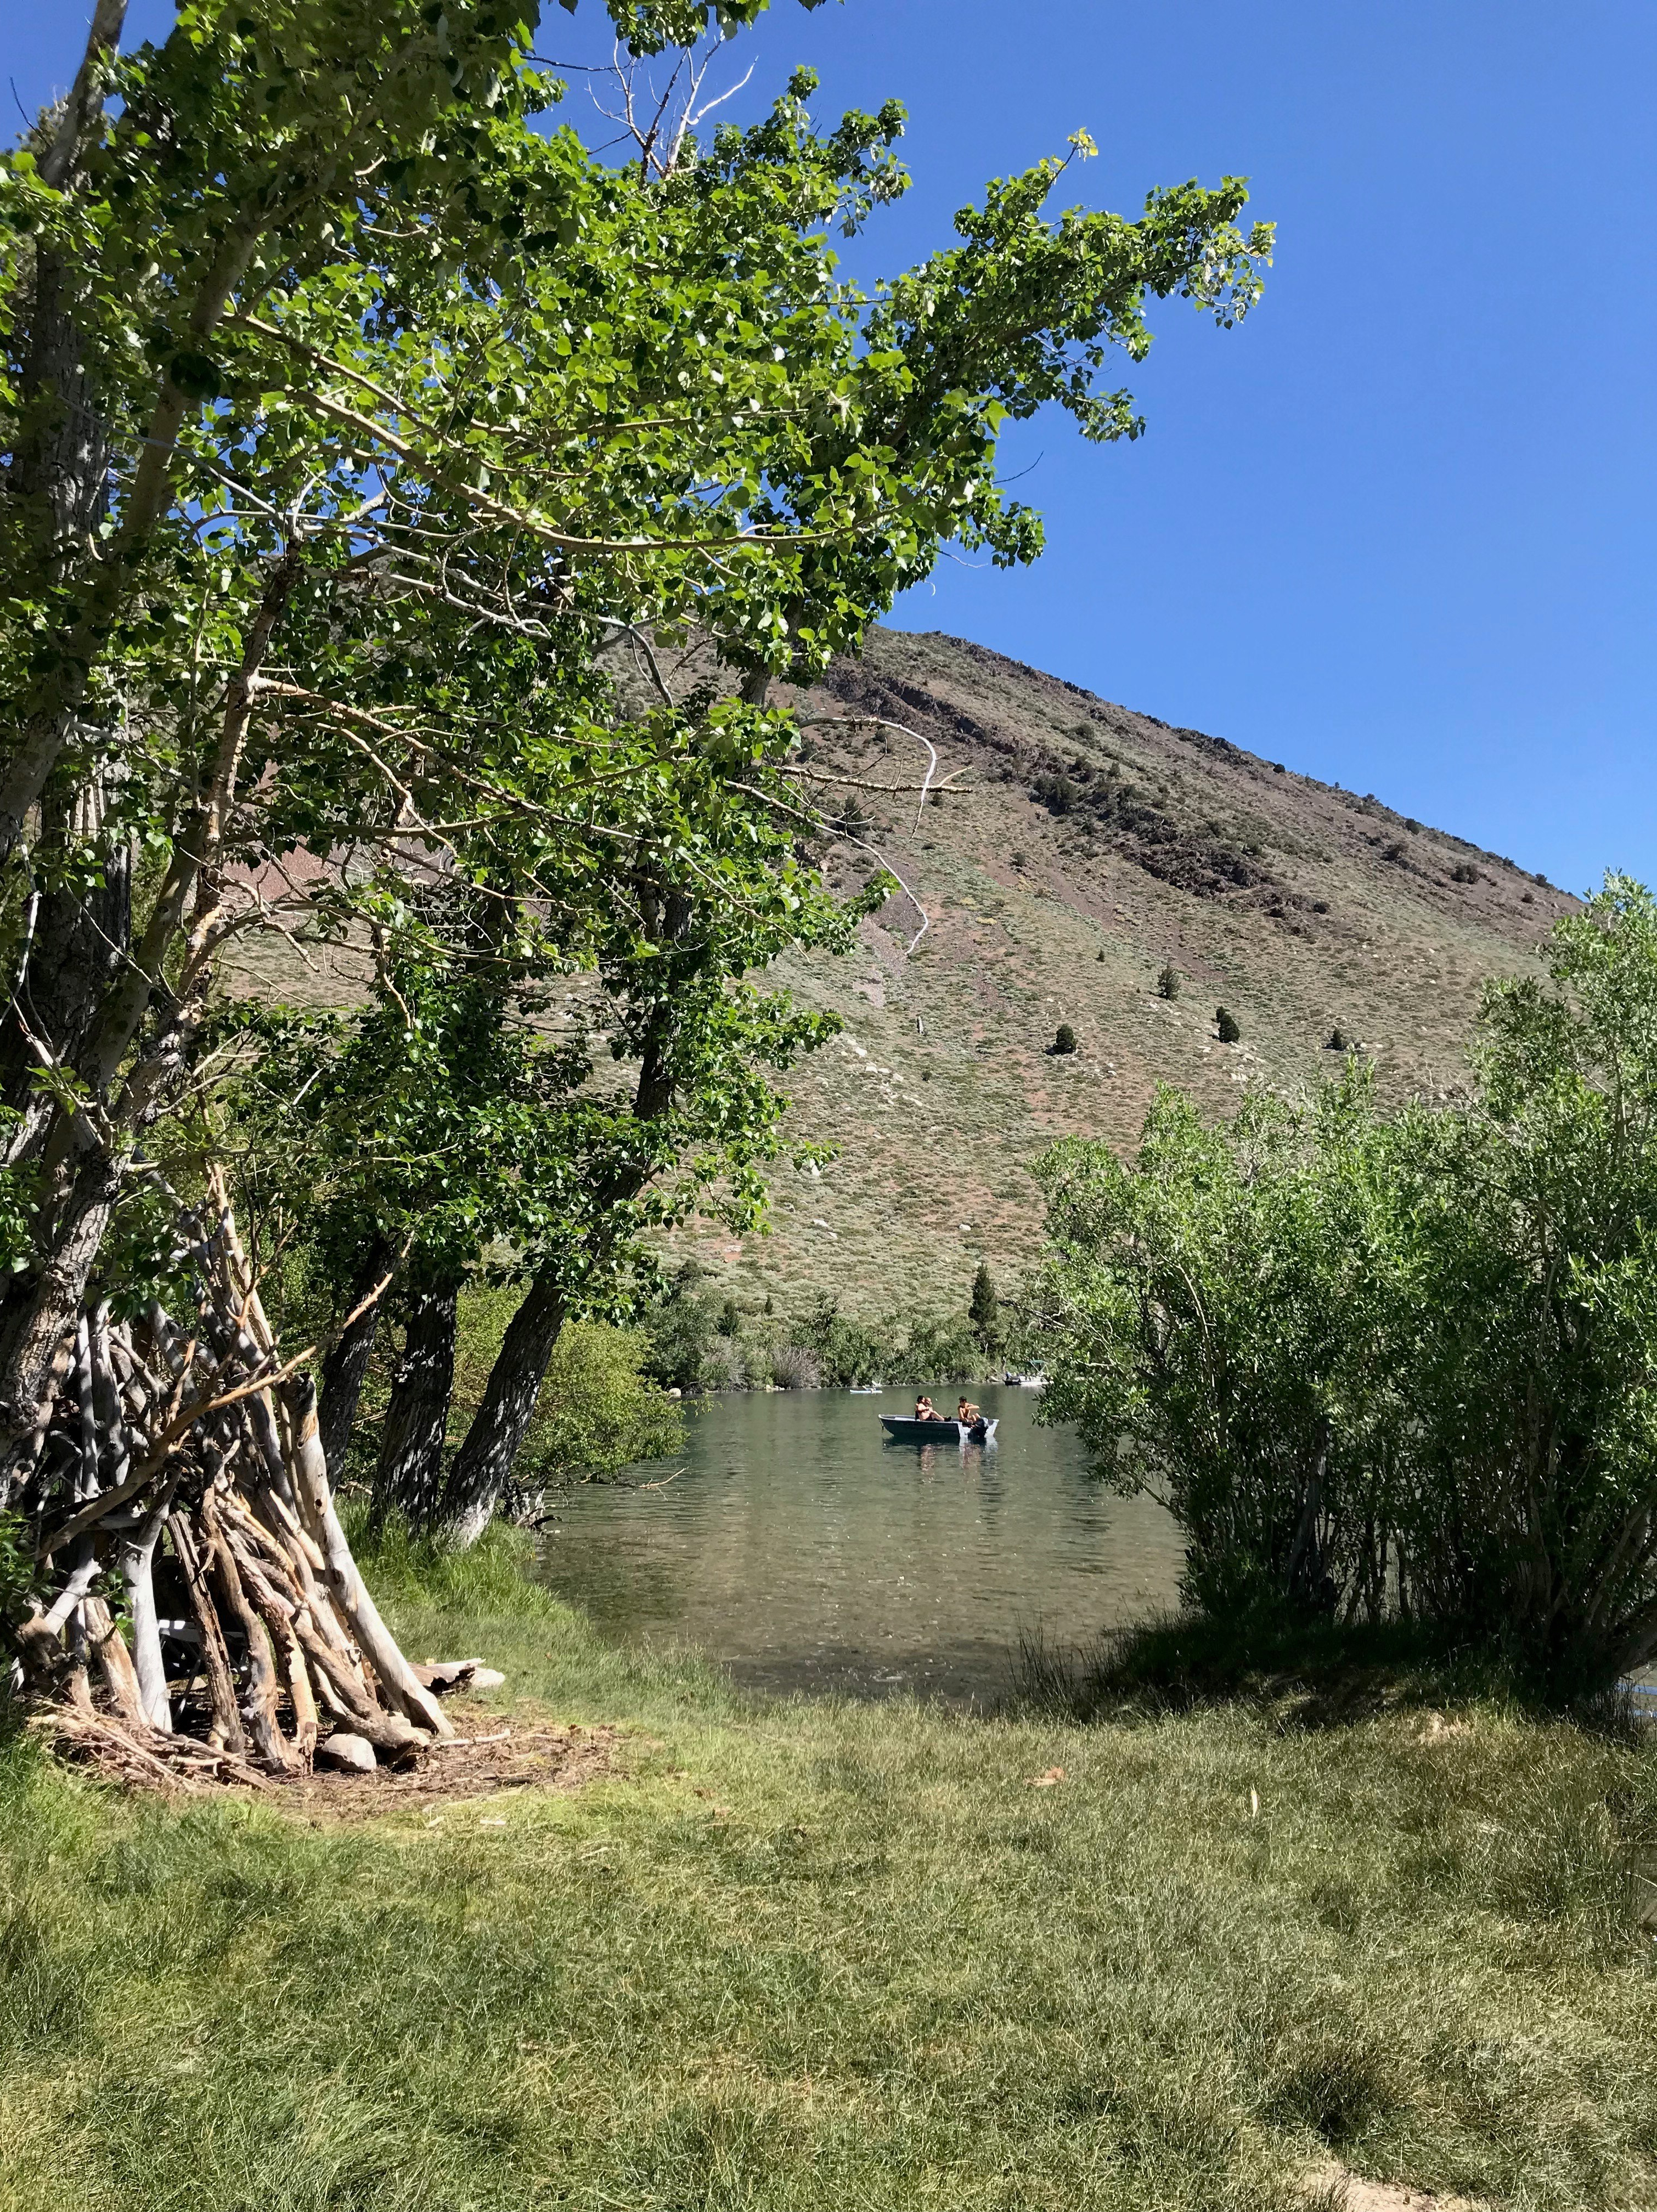 Convict lake teepee and boat